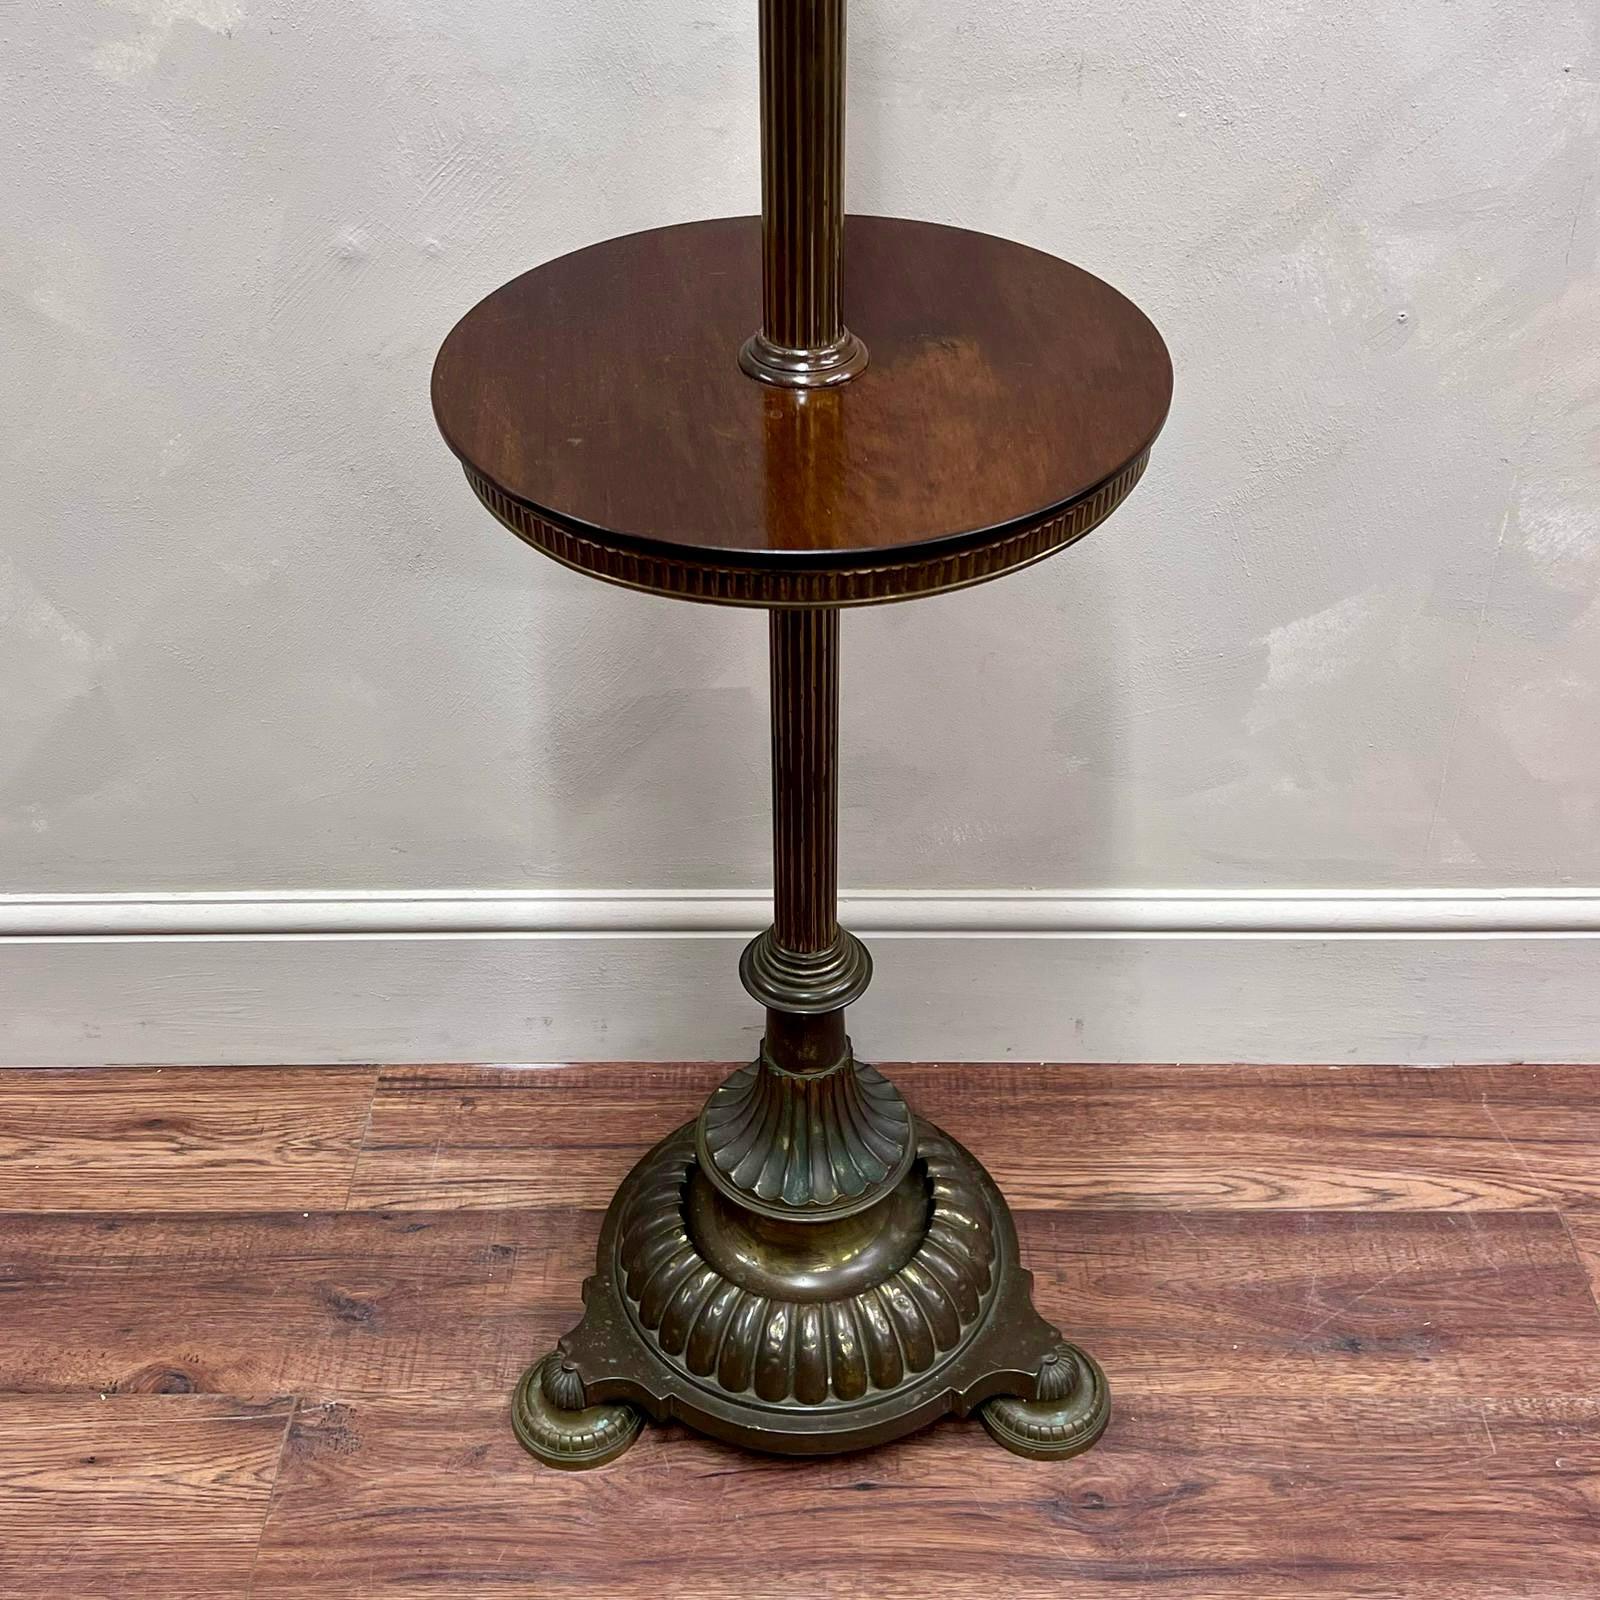 19th century, brass floor lamp with a very useful polished mahogany side table, perfect for beside a chair as shown.
Beautifully detailed, sturdy base.
Fully wired and pat tested , we can change the wiring to suit your needs if required .
Currently